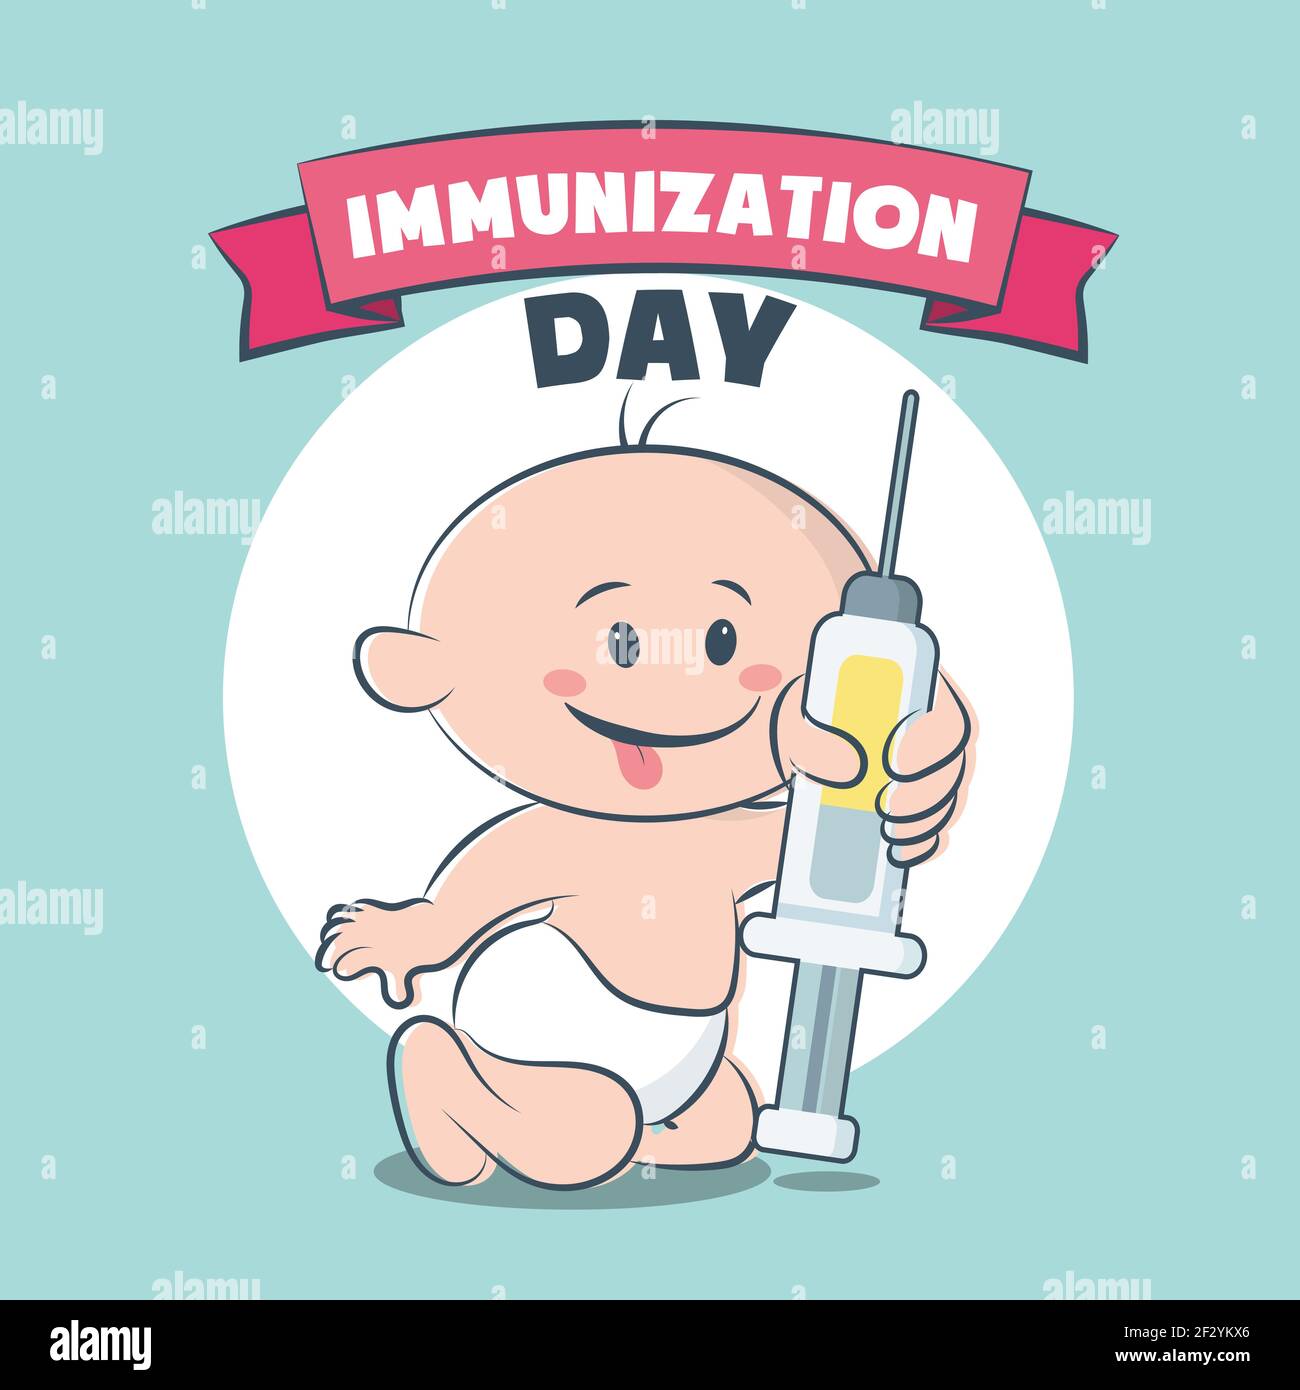 Immunization Day poster, baby child vaccination with injection